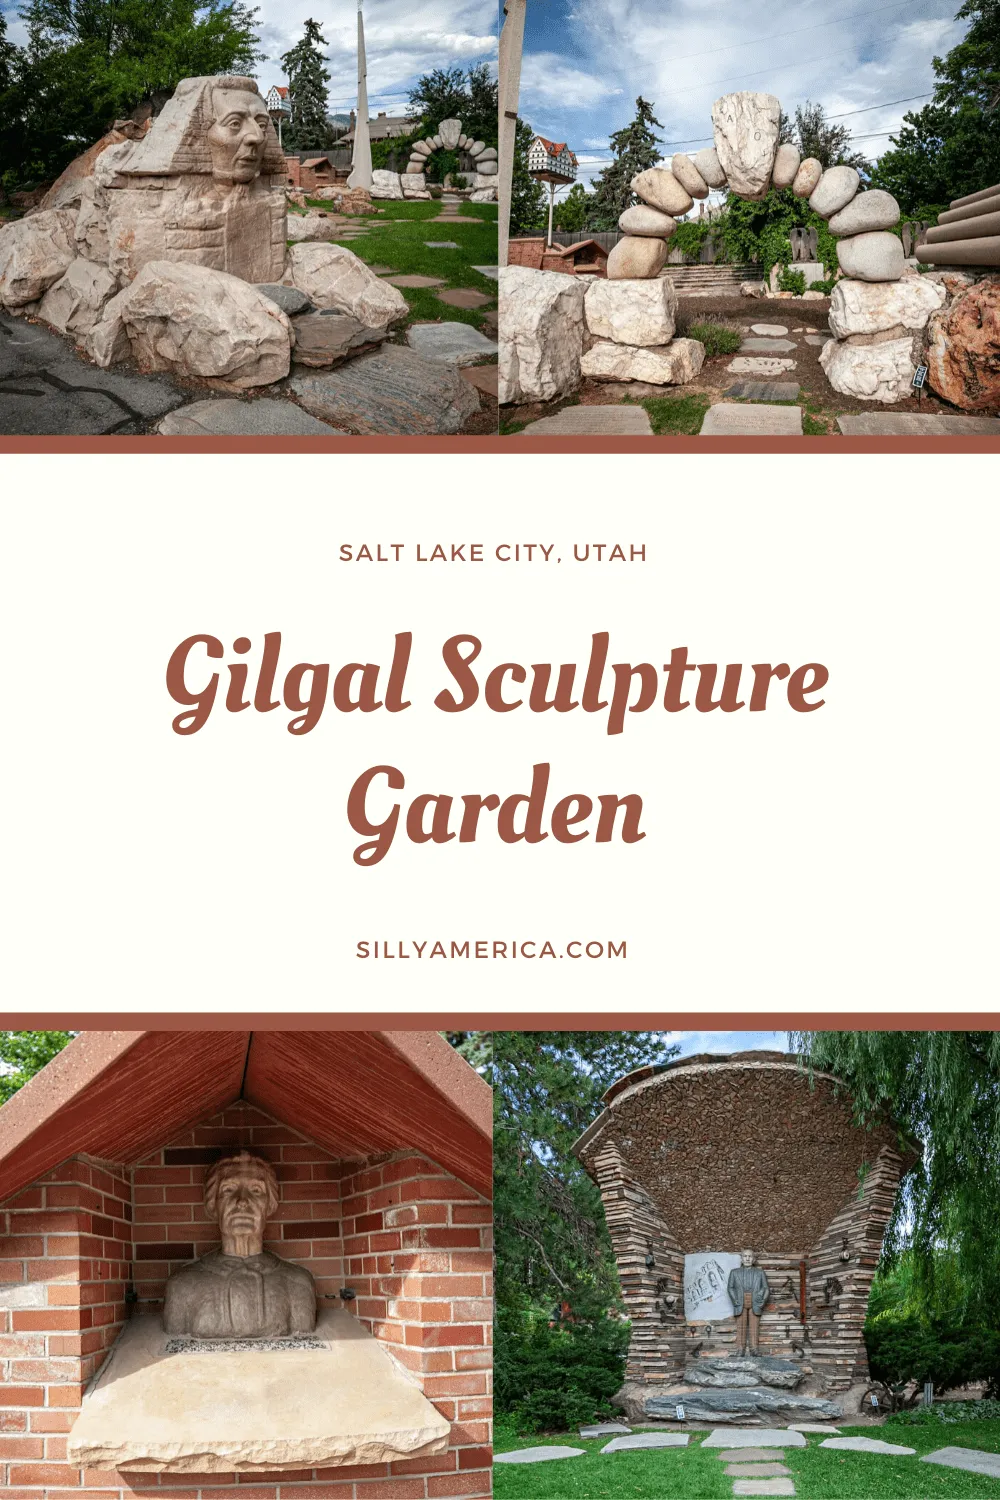 Gilgal Sculpture Garden, a small public city park in Salt Lake City, Utah, is the work of Thomas Battersby Child, Jr. and displays Mormon sculptures. #UtahRoadsideAttractions #UtahRoadsideAttraction #RoadsideAttractions #RoadsideAttraction #RoadTrip #UtahRoadTrip #UtahRoadTripWithKids #UtahRoadTripBucketLists #UtahBucketList #UtahRoadTripItinerary #UtahRoadTripPictures #UtahRoadTripMap #UtahWeekendRoadTrip #SaltLakeCityRoadTrip #UtahRoadTripAdventure